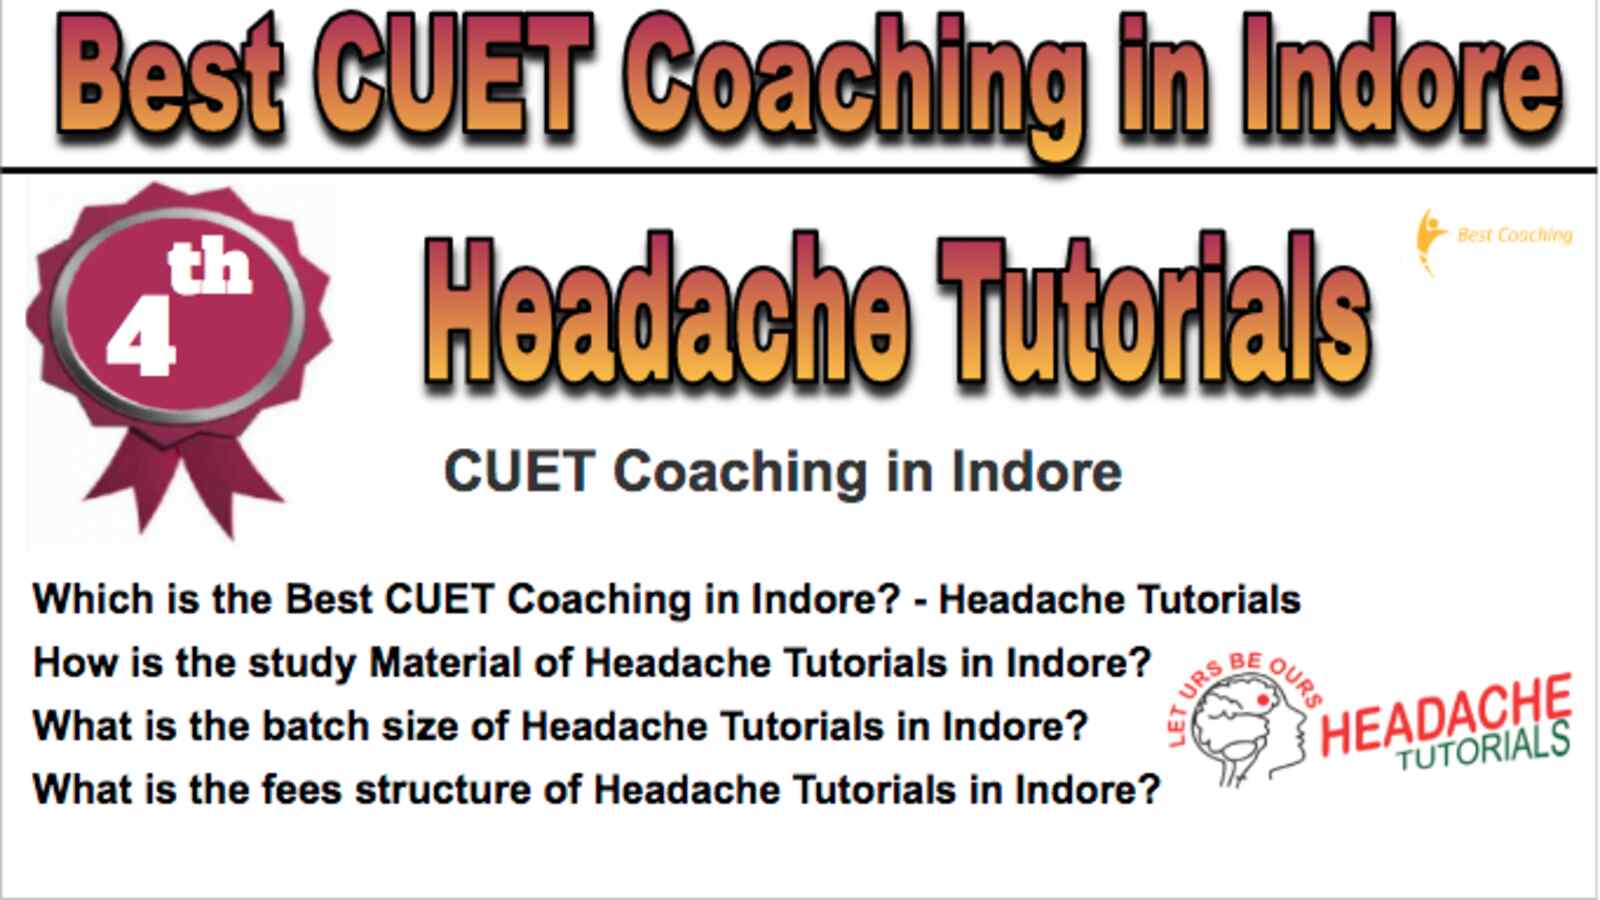 4th Top CUET Coaching in Indore